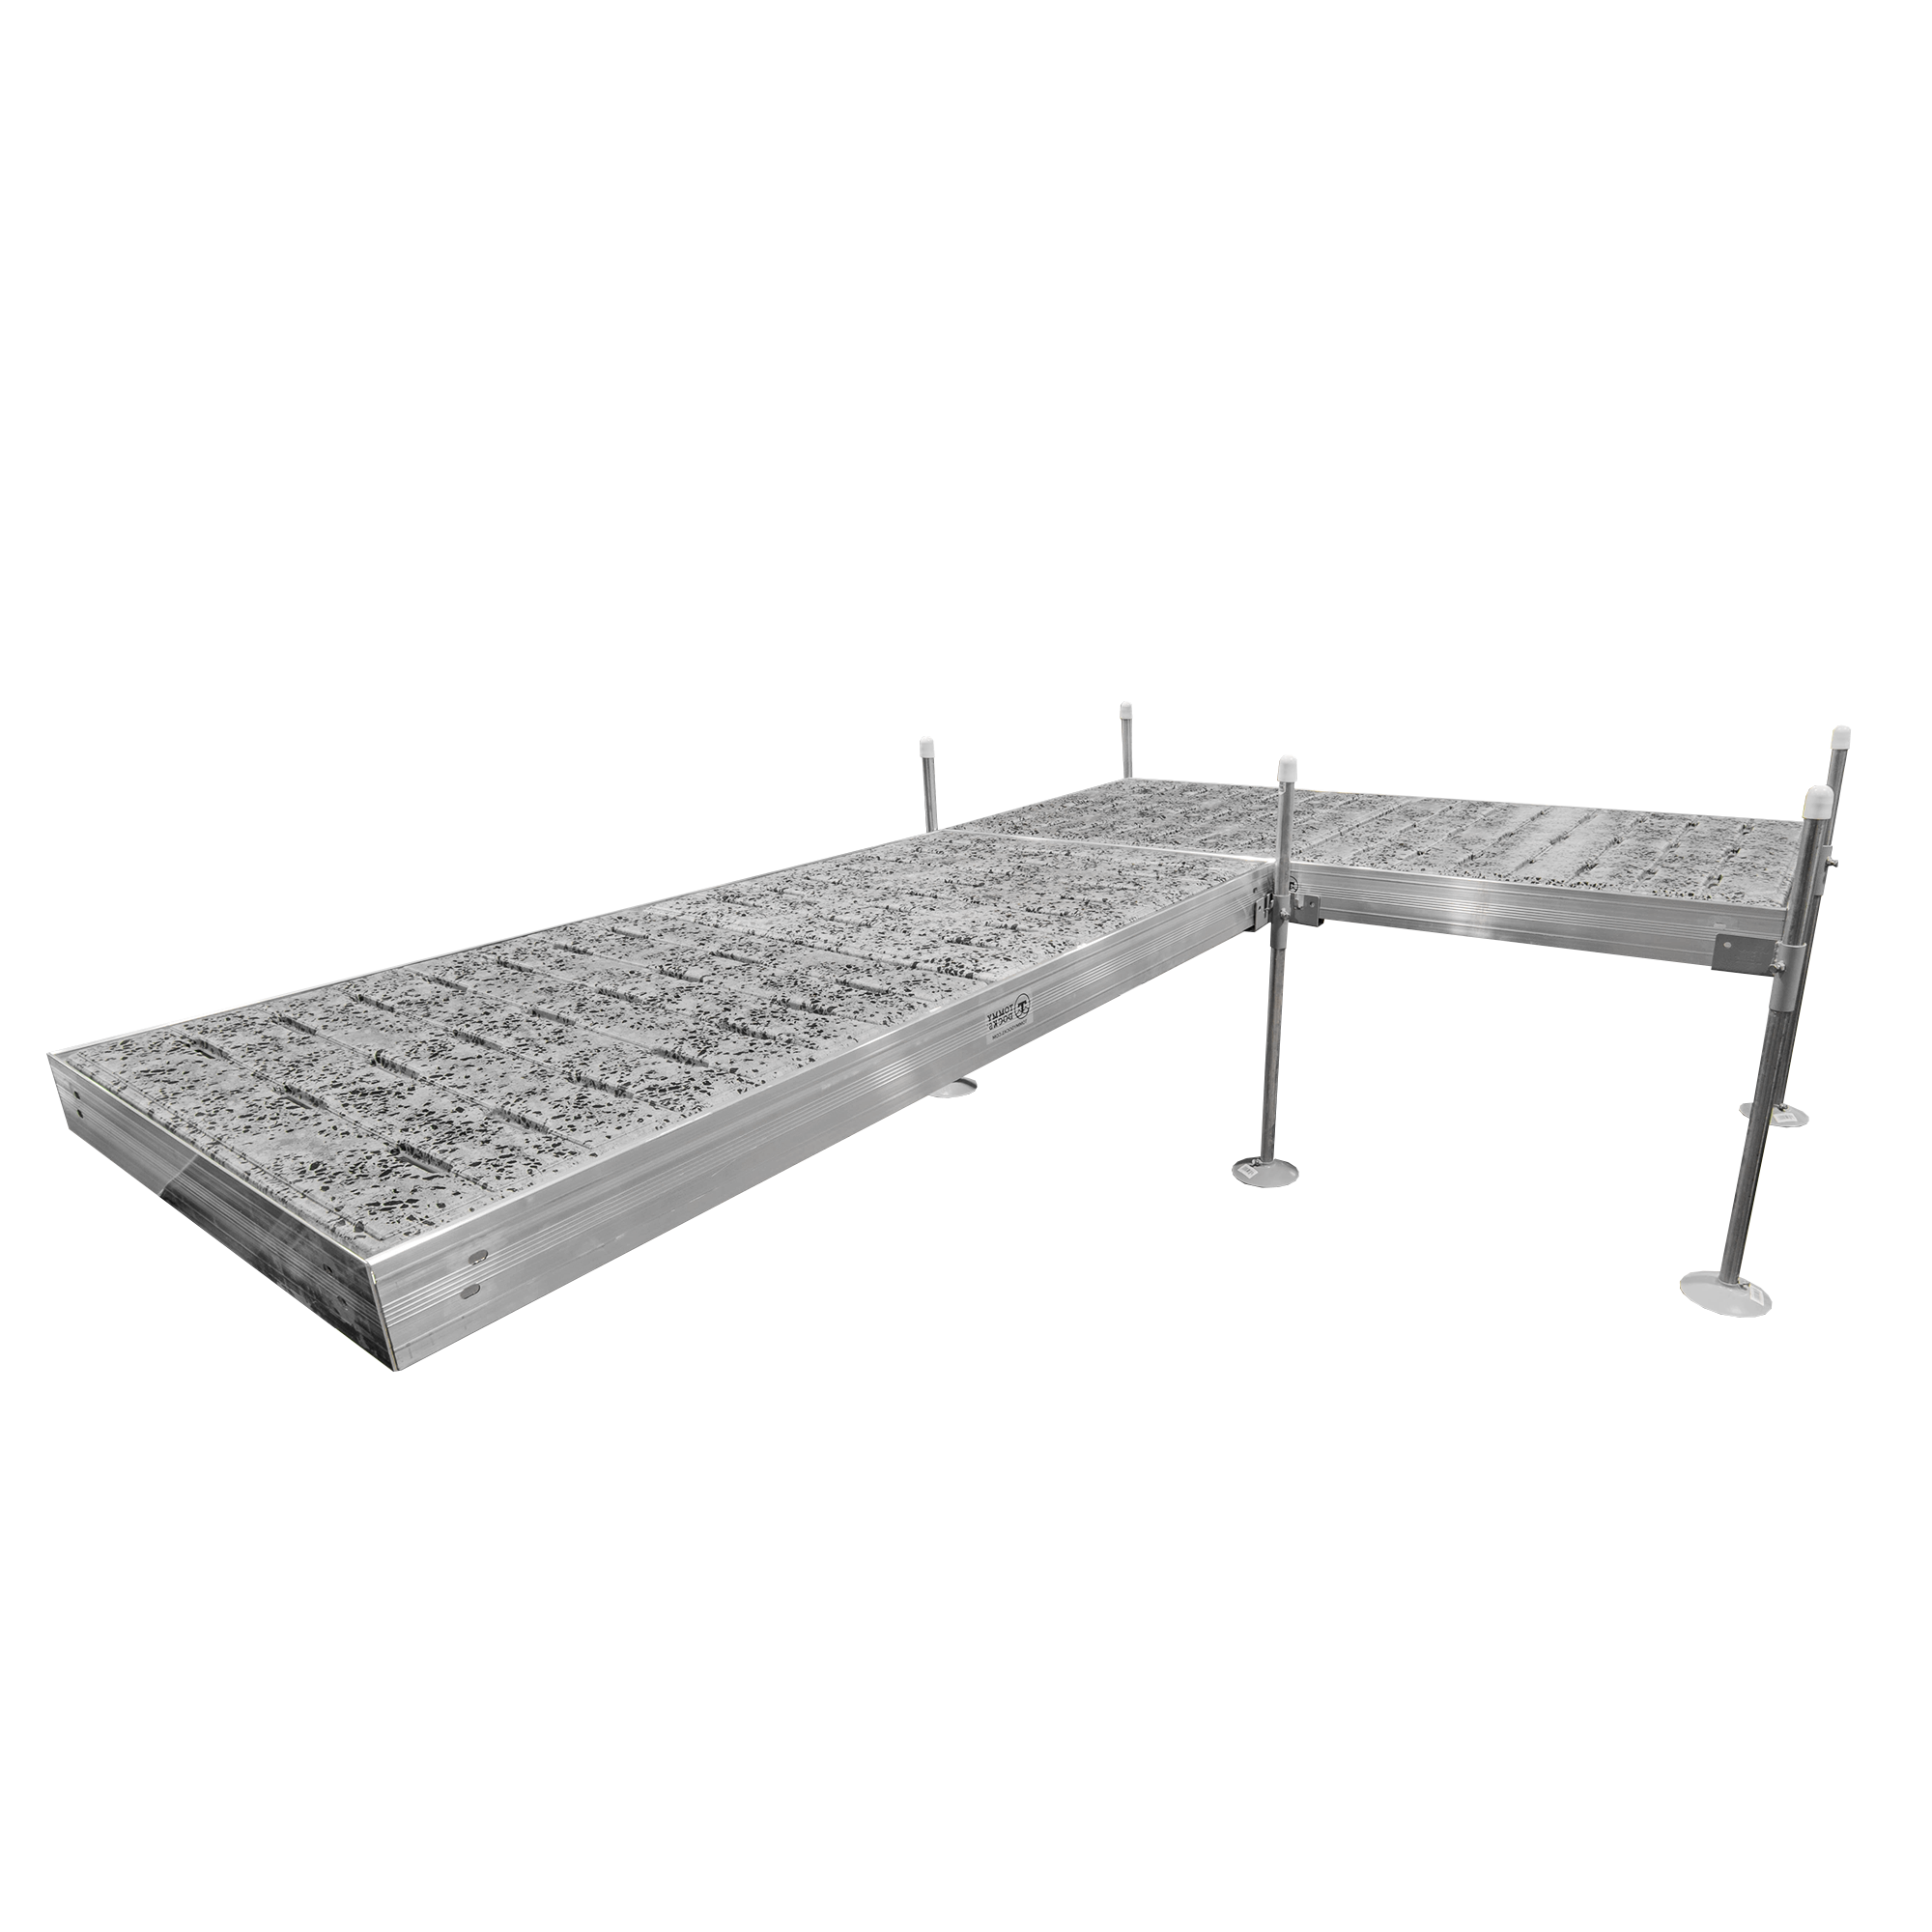 12' L-Shaped Boat Dock System with Aluminum Frame and Thermoformed Terrazzo Decking